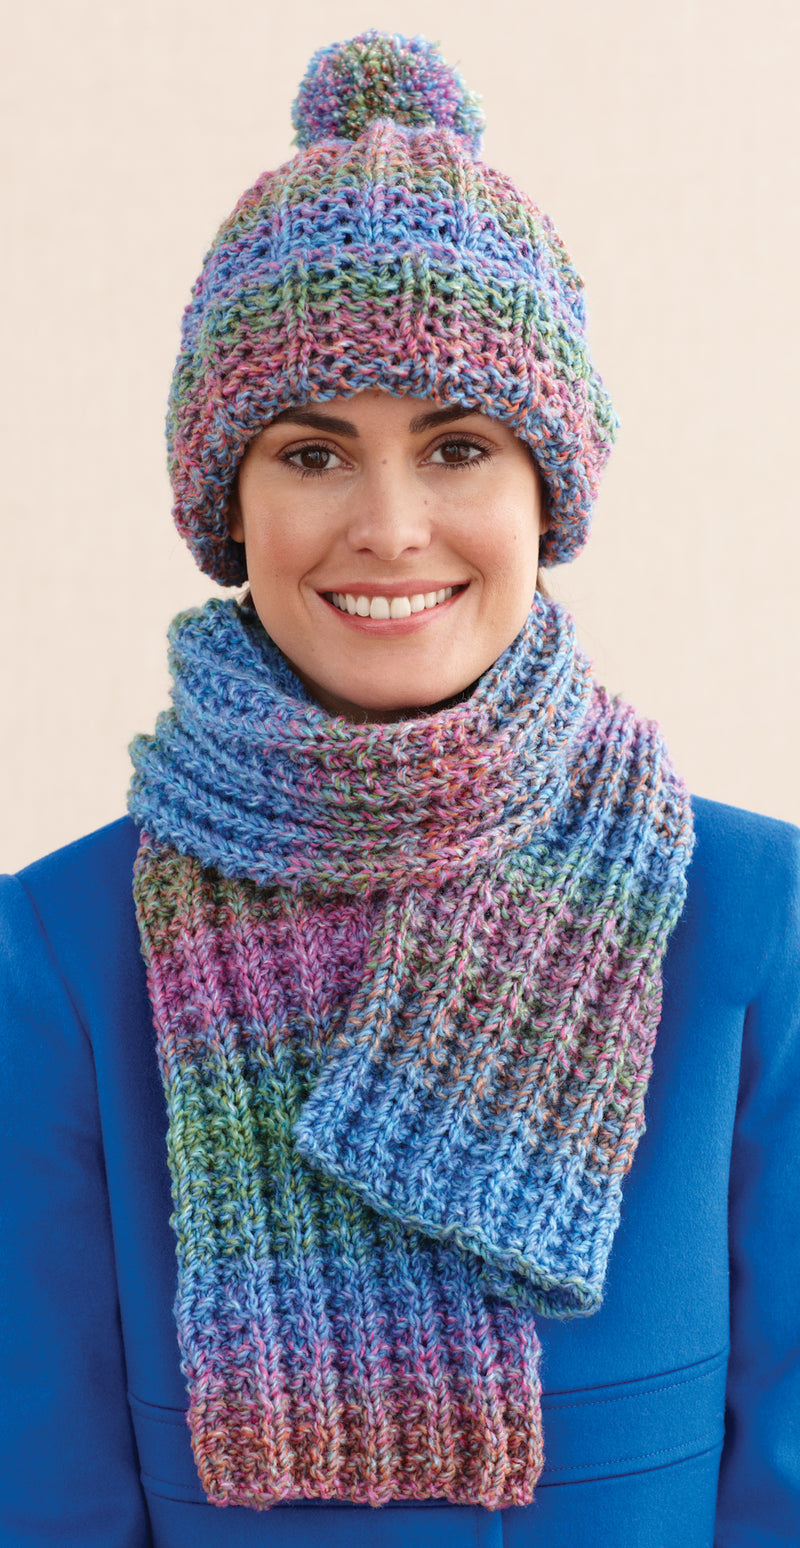 Rustic Ribbed Hat and Scarf Pattern (Knit) - Version 8